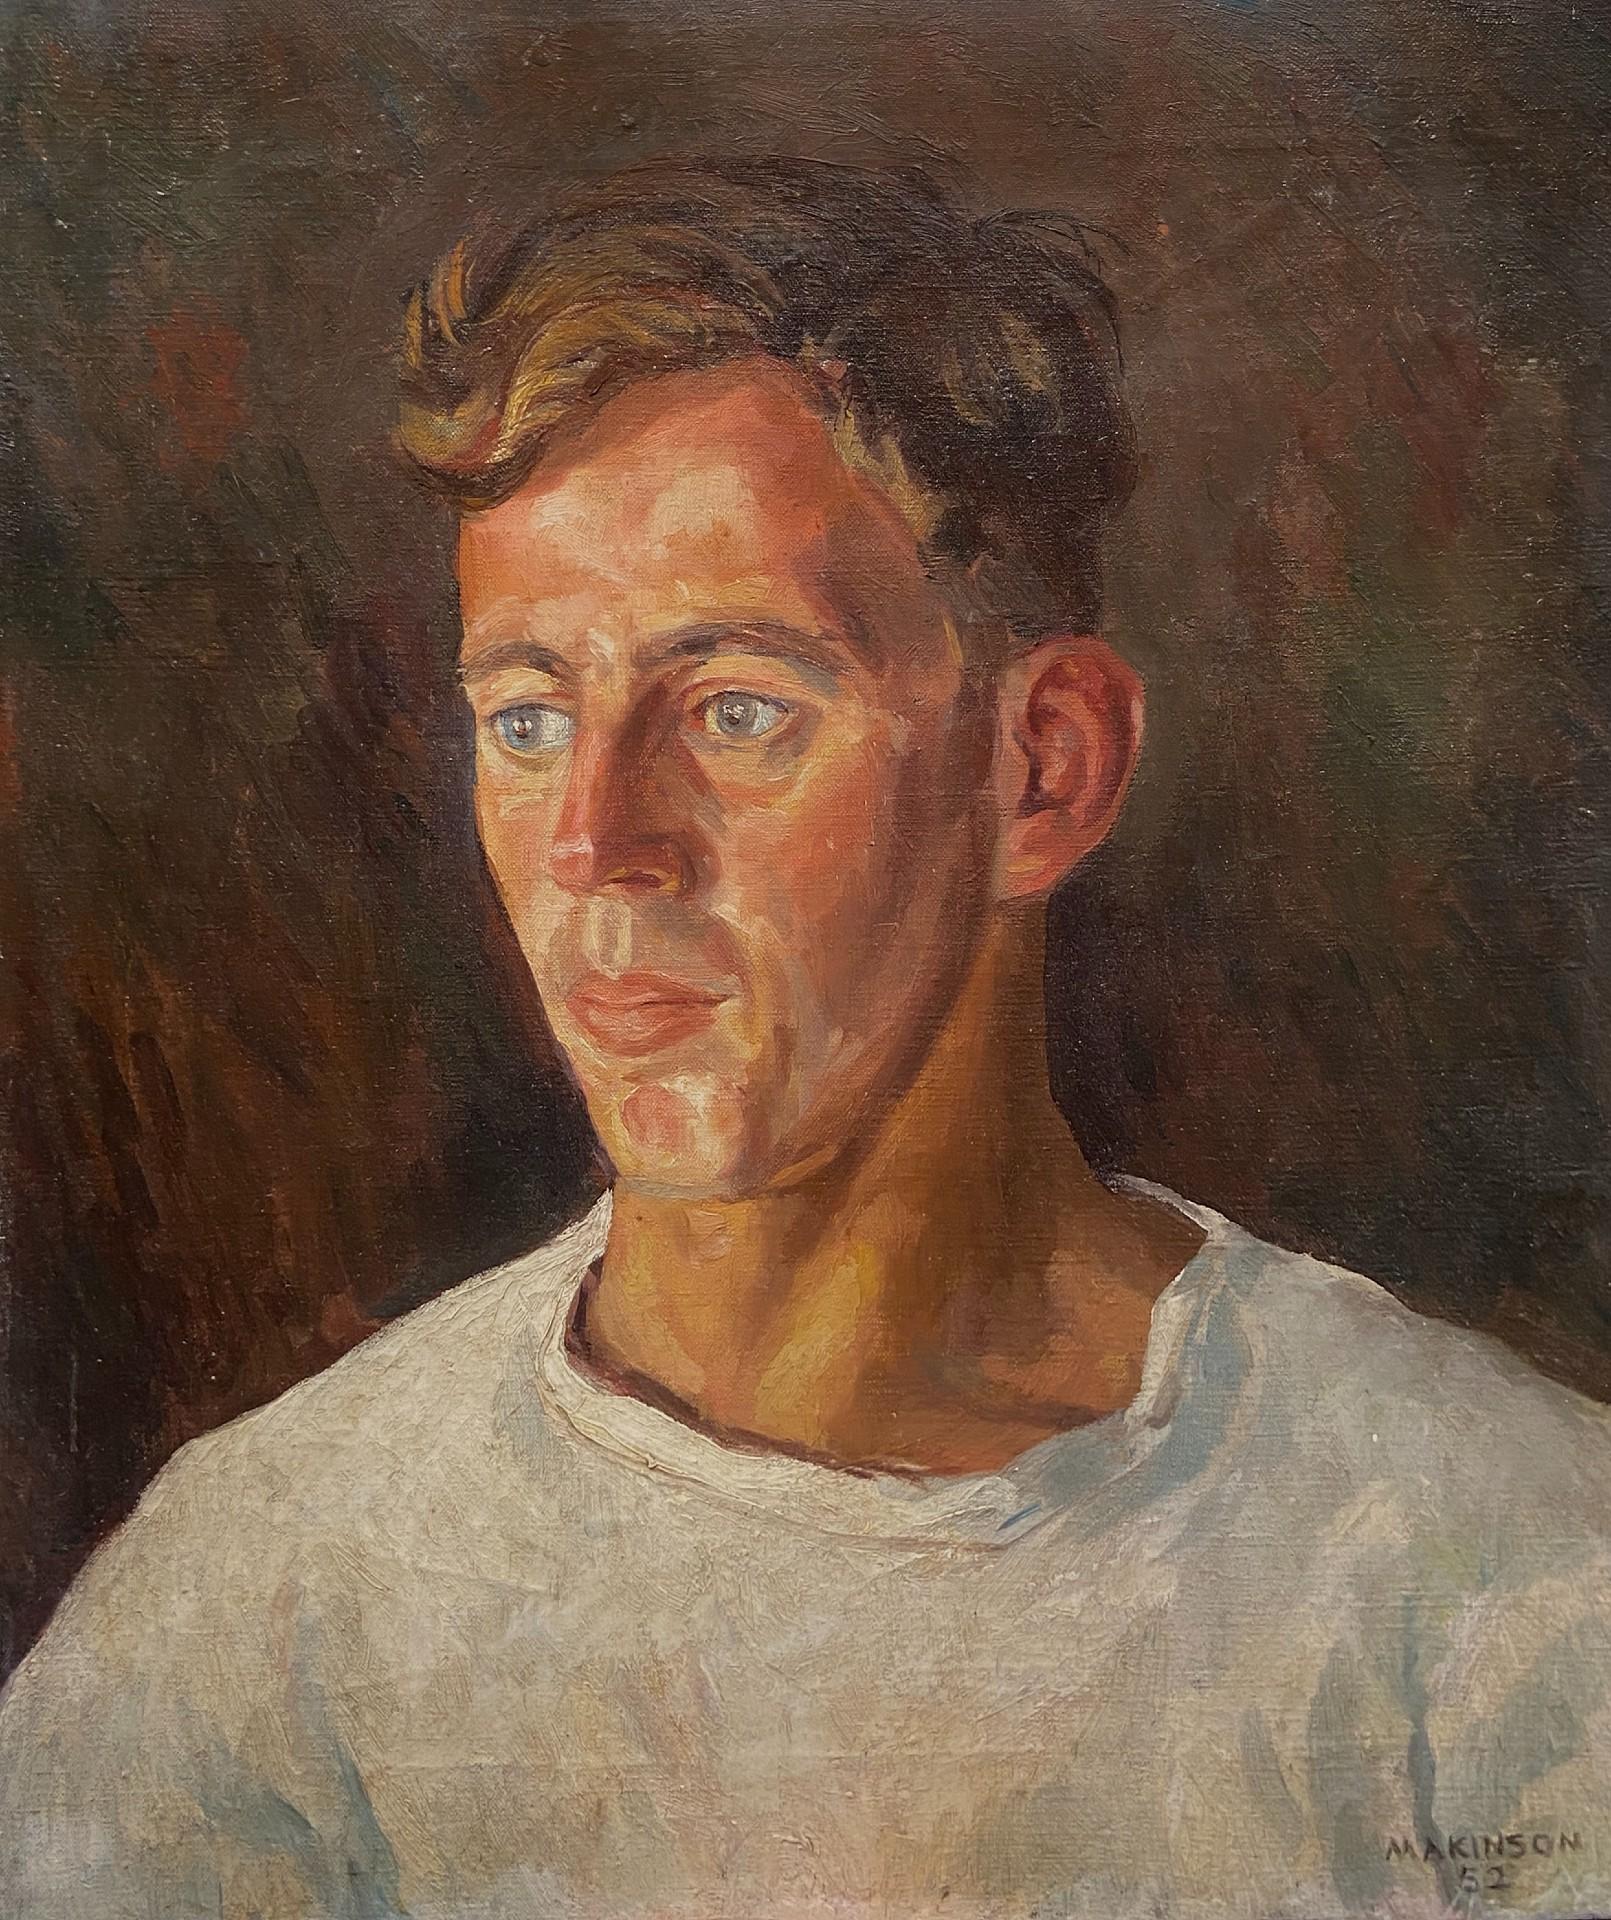 Trevor Owen Makinson Portrait Painting - Portrait of a Young man, 20th Century British Oil, Signed and dated 1952